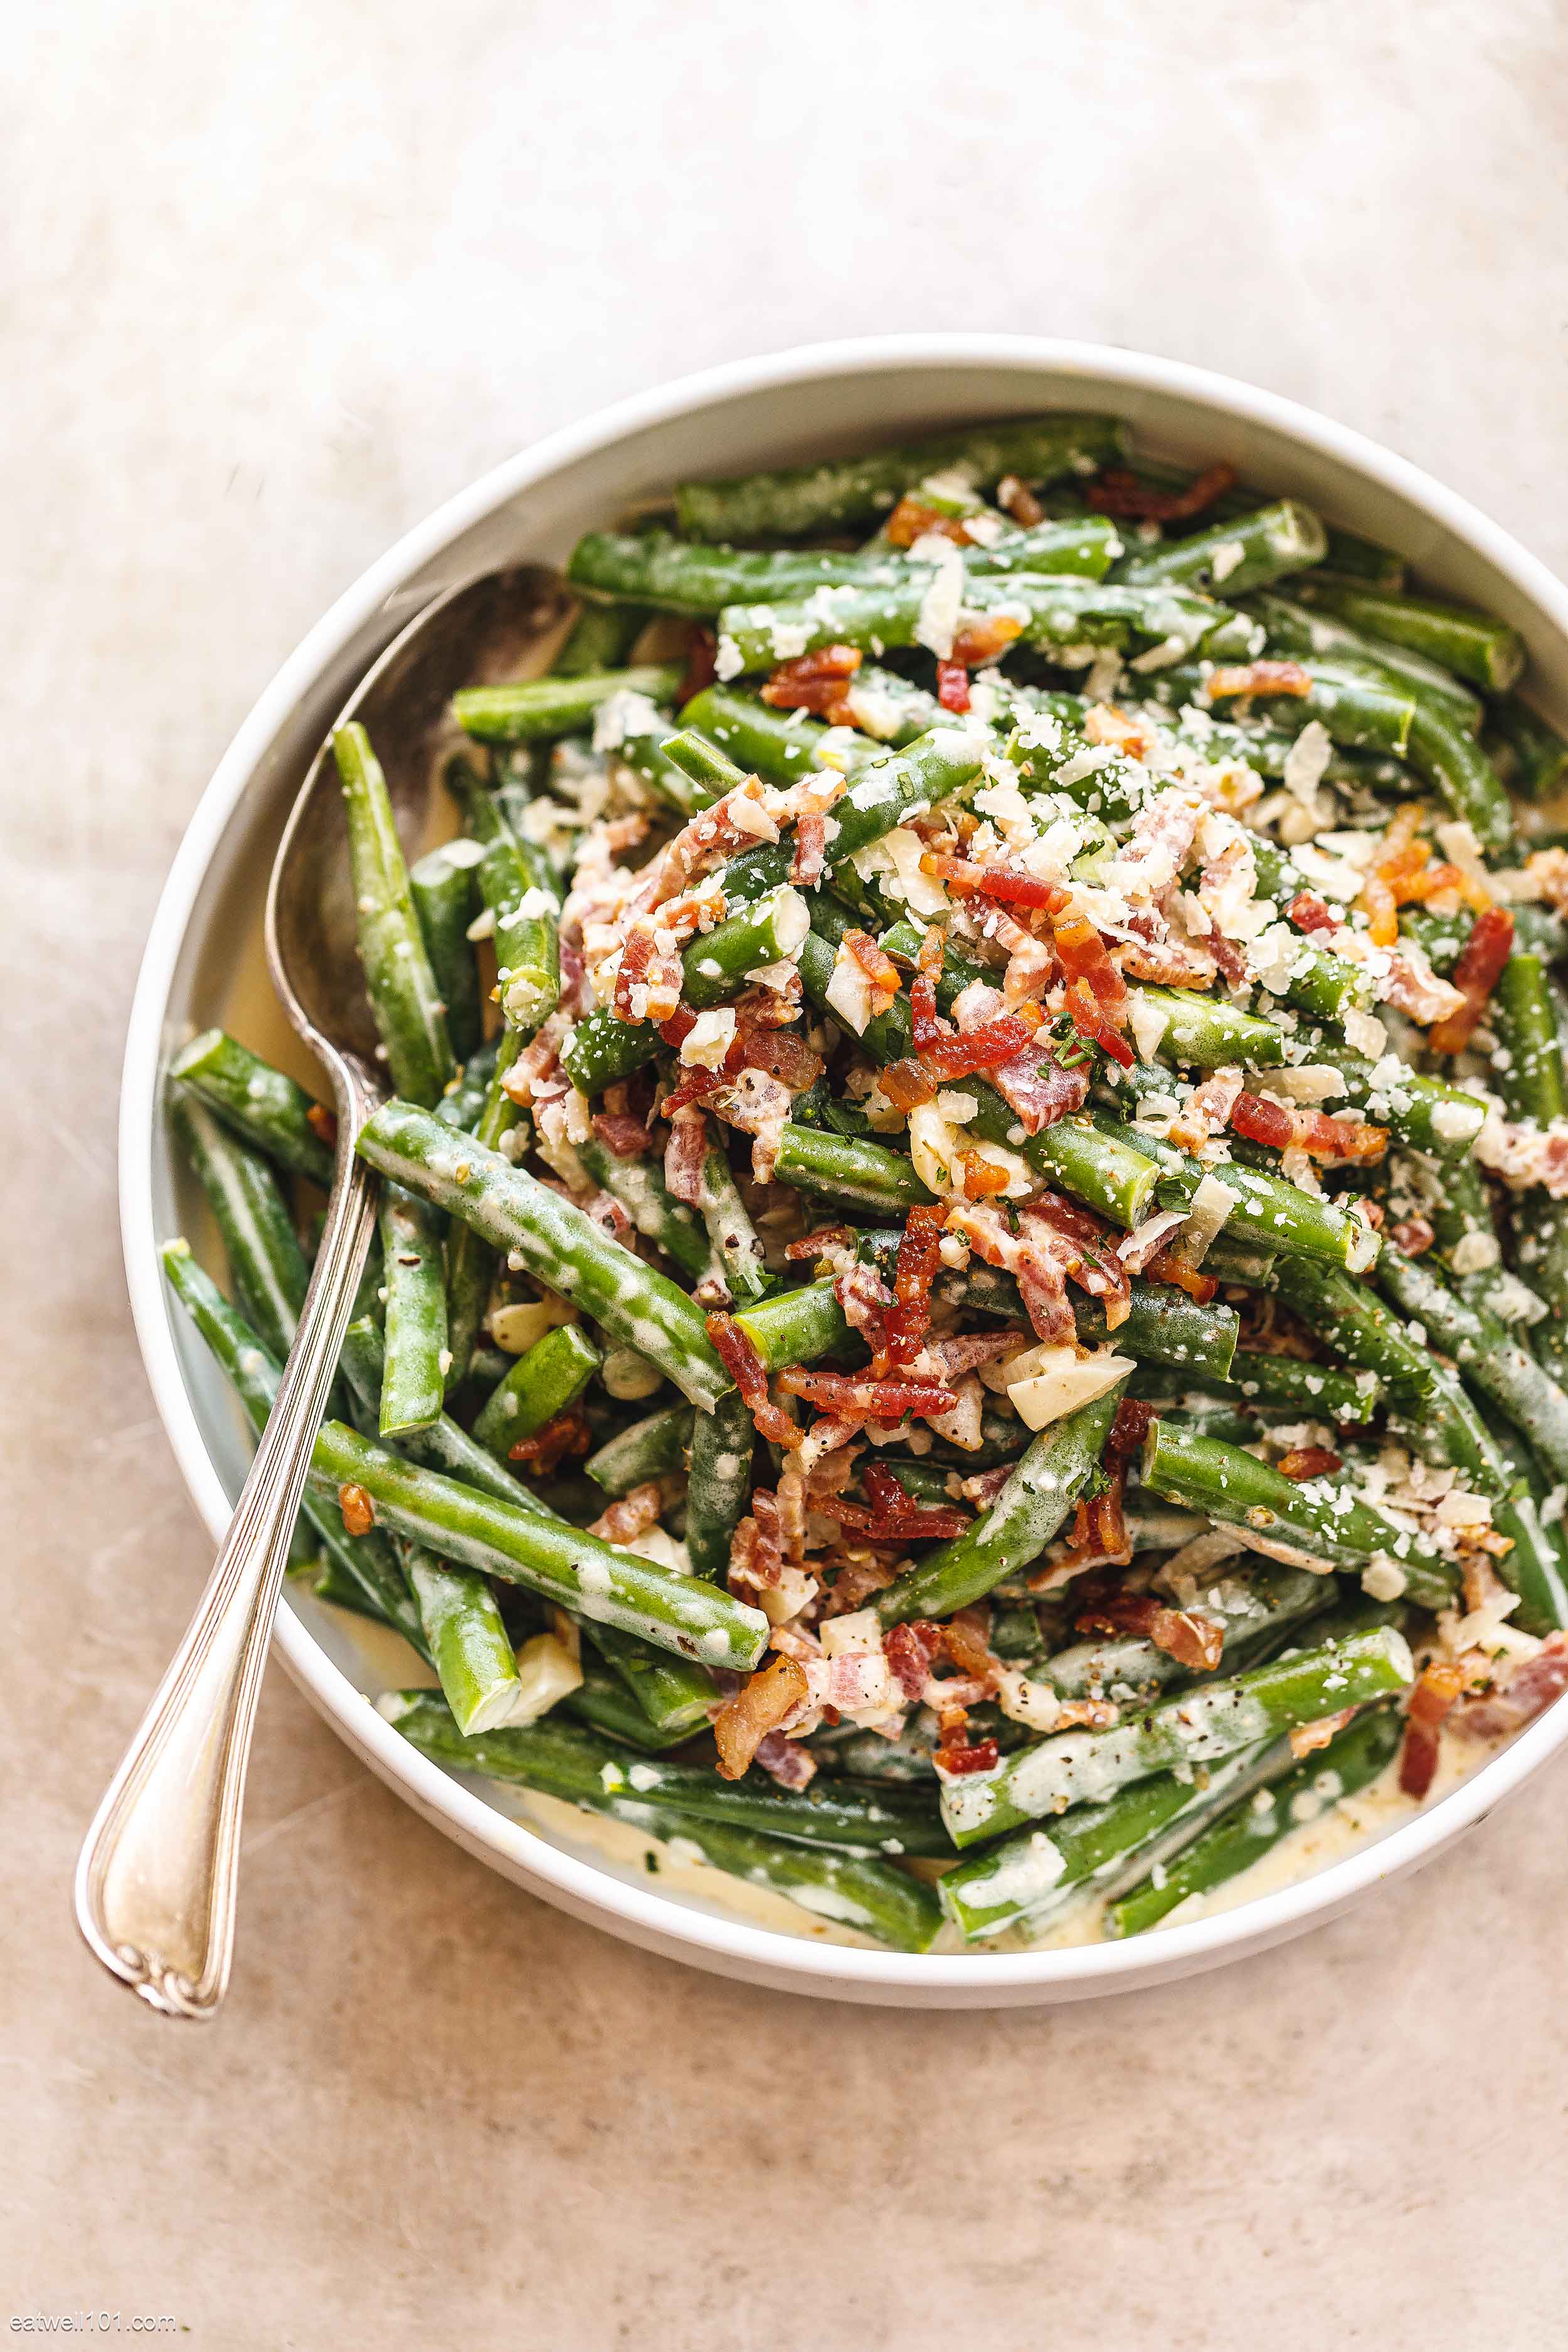 Green Beans Casserole Recipe with Bacon and Parmesan – Best Green Bean ...